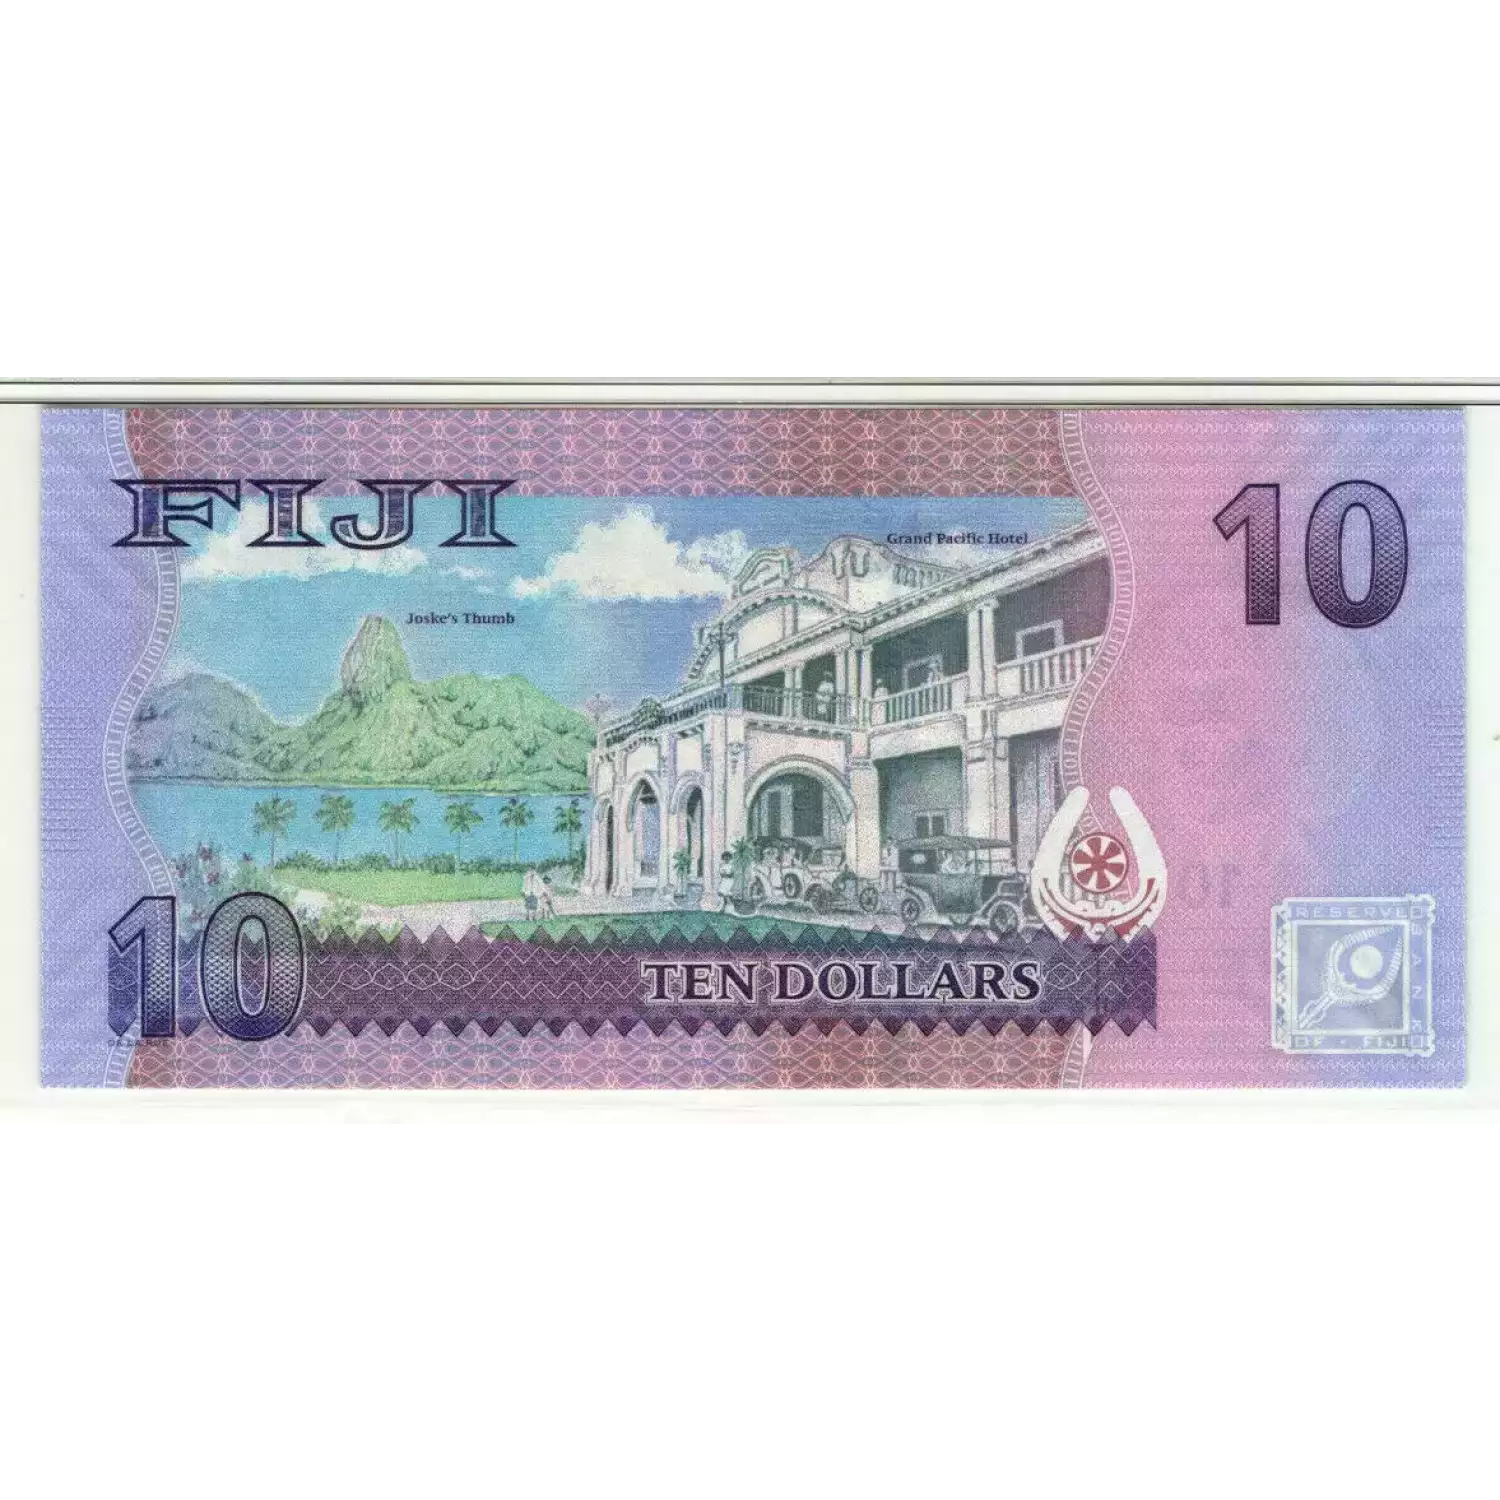 10 Dollars ND (2013), 2012 Issue a. Issued note Fiji 116 (4)